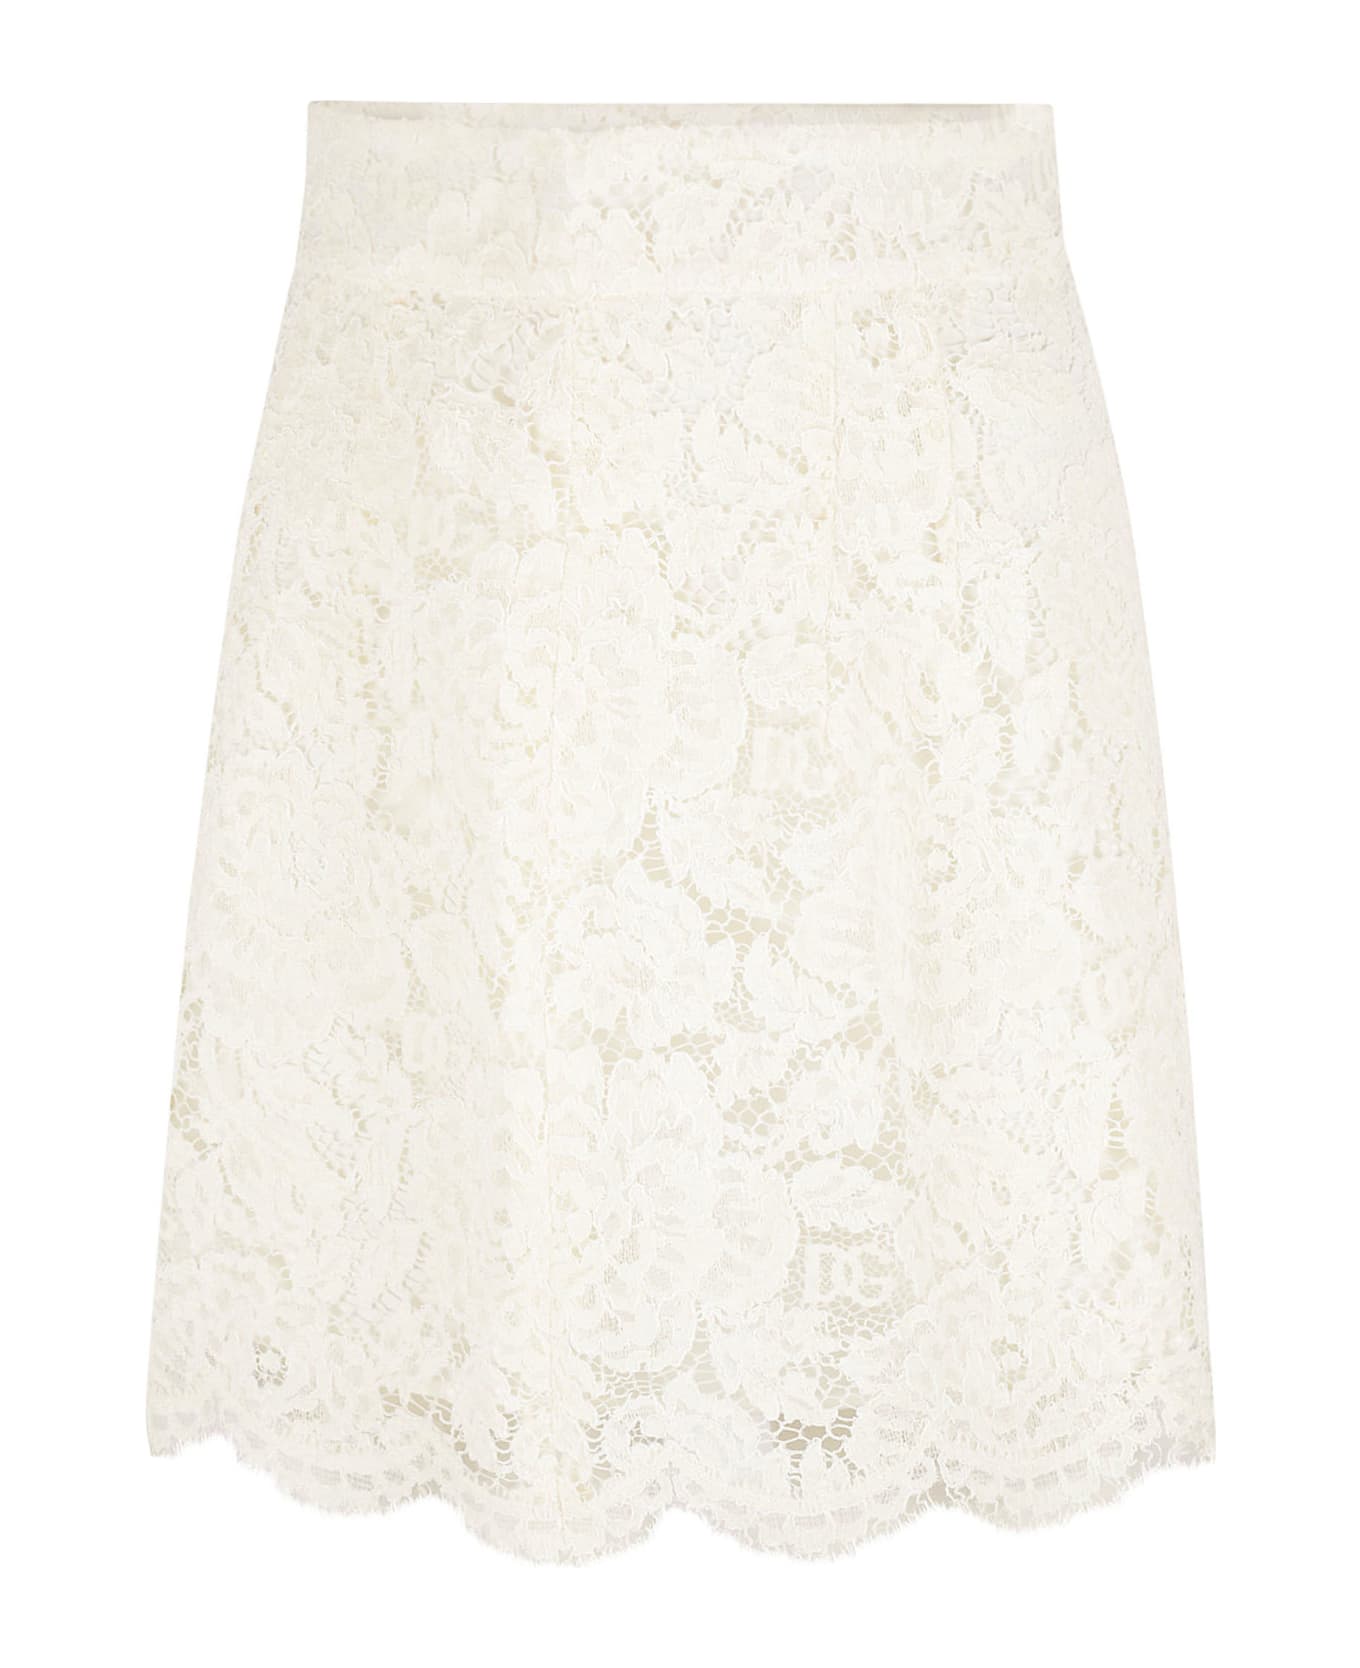 Dolce & Gabbana Floral Embroidered Perforated Skirt - Bianco naturale